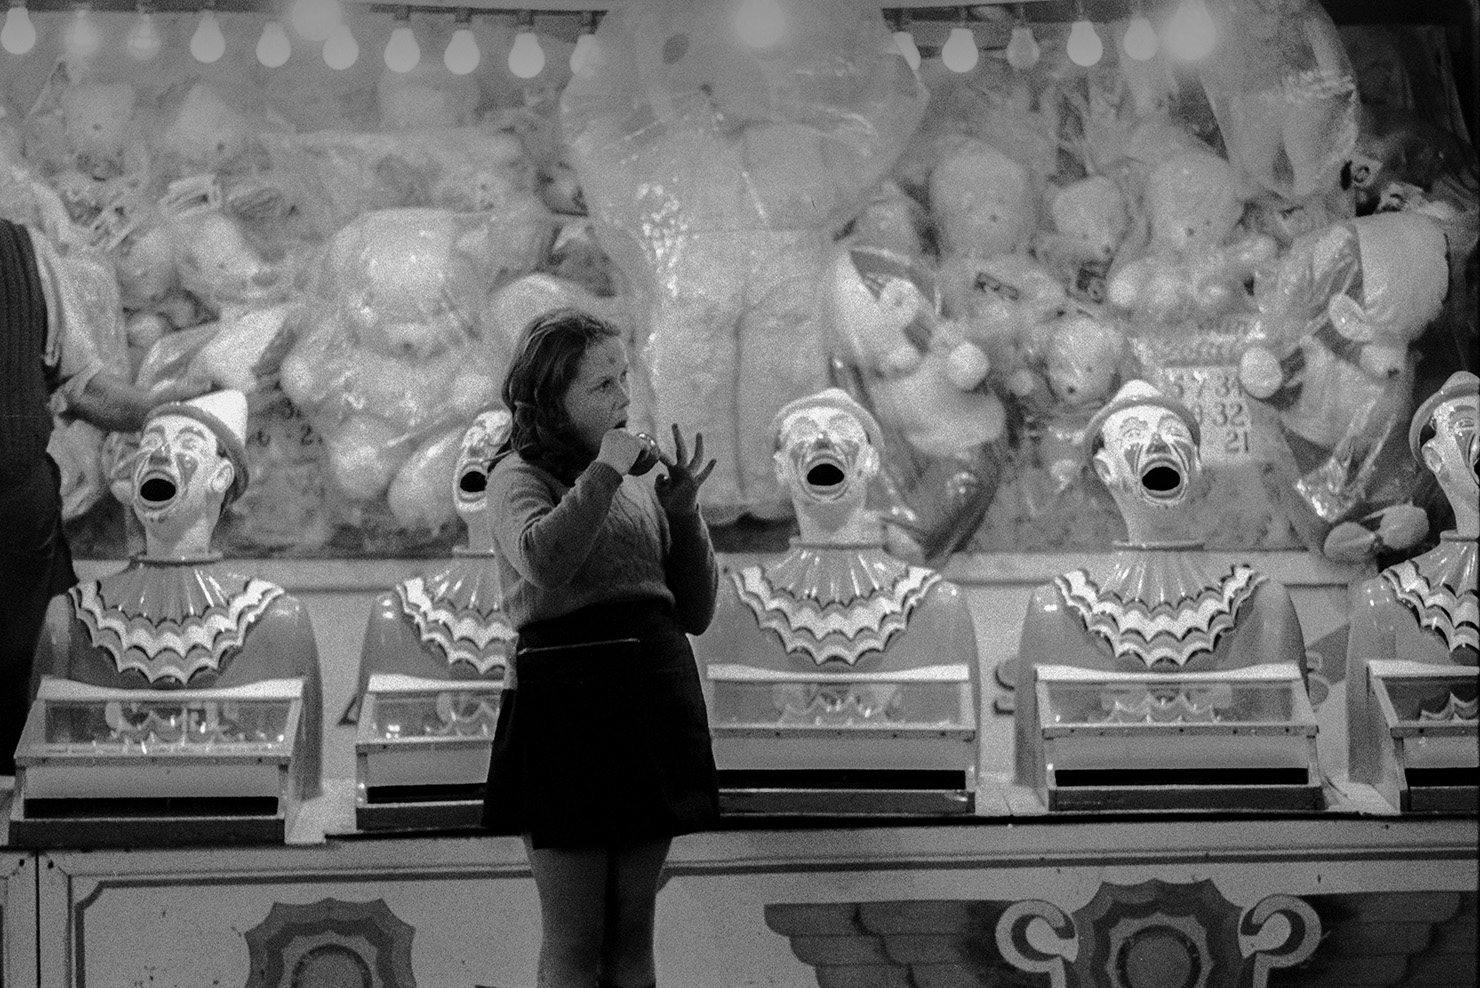 A woman eating a toffee apple stood by a clown game at Barnstaple fair. Soft toy prizes can be seen behind the game.